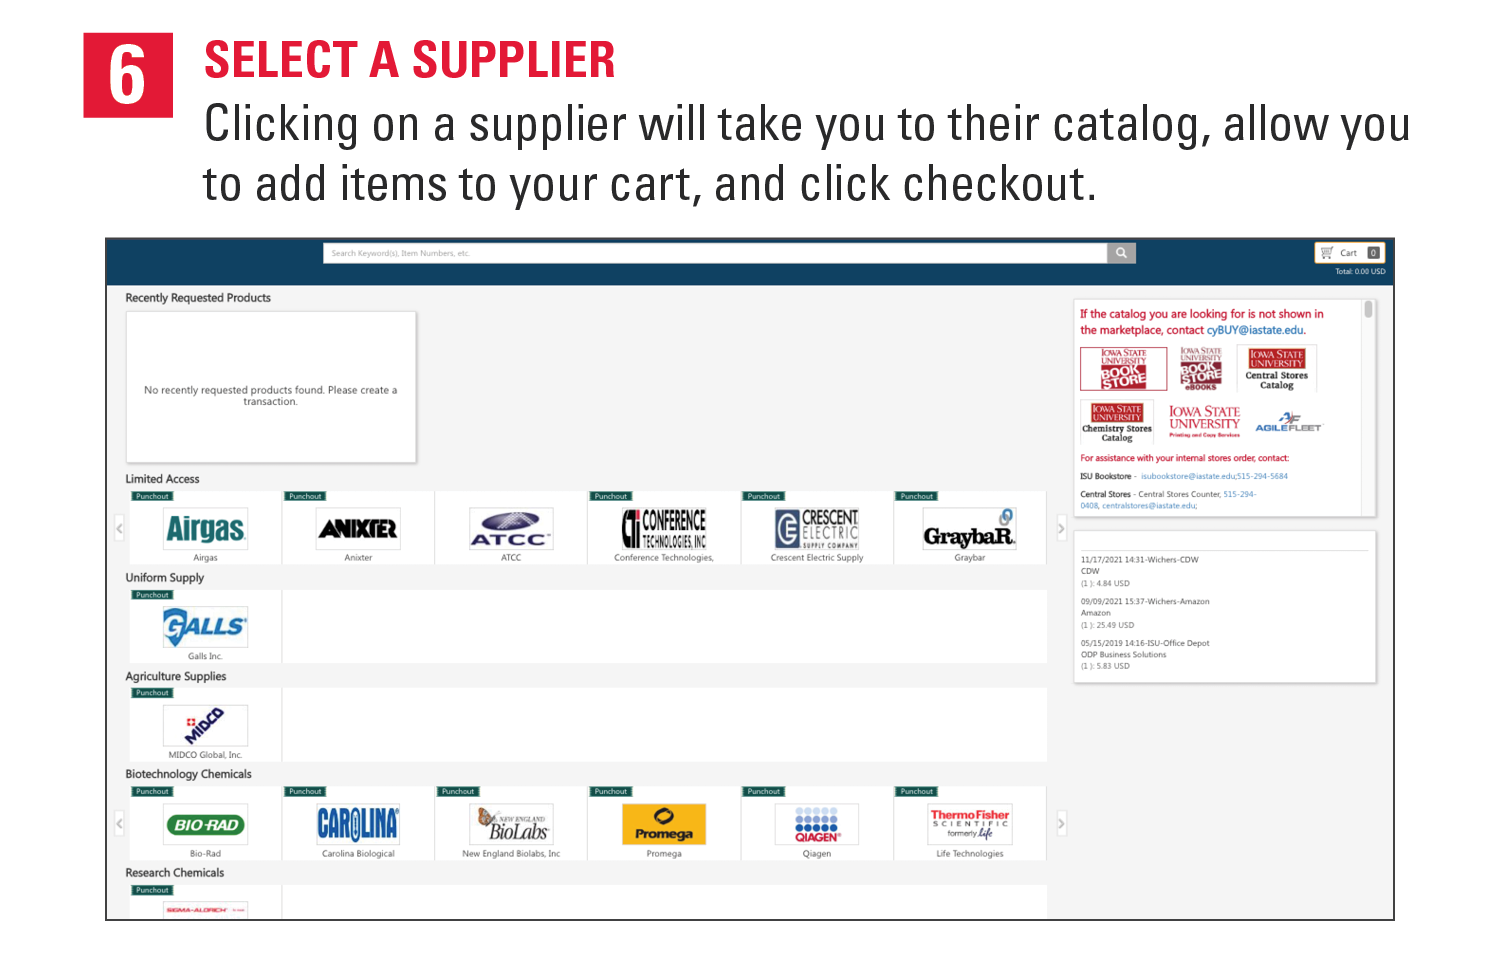 6. Select a supplier. Clicking on a supplier will take you to their catalog, allow you to add items to your cart, and click checkout.